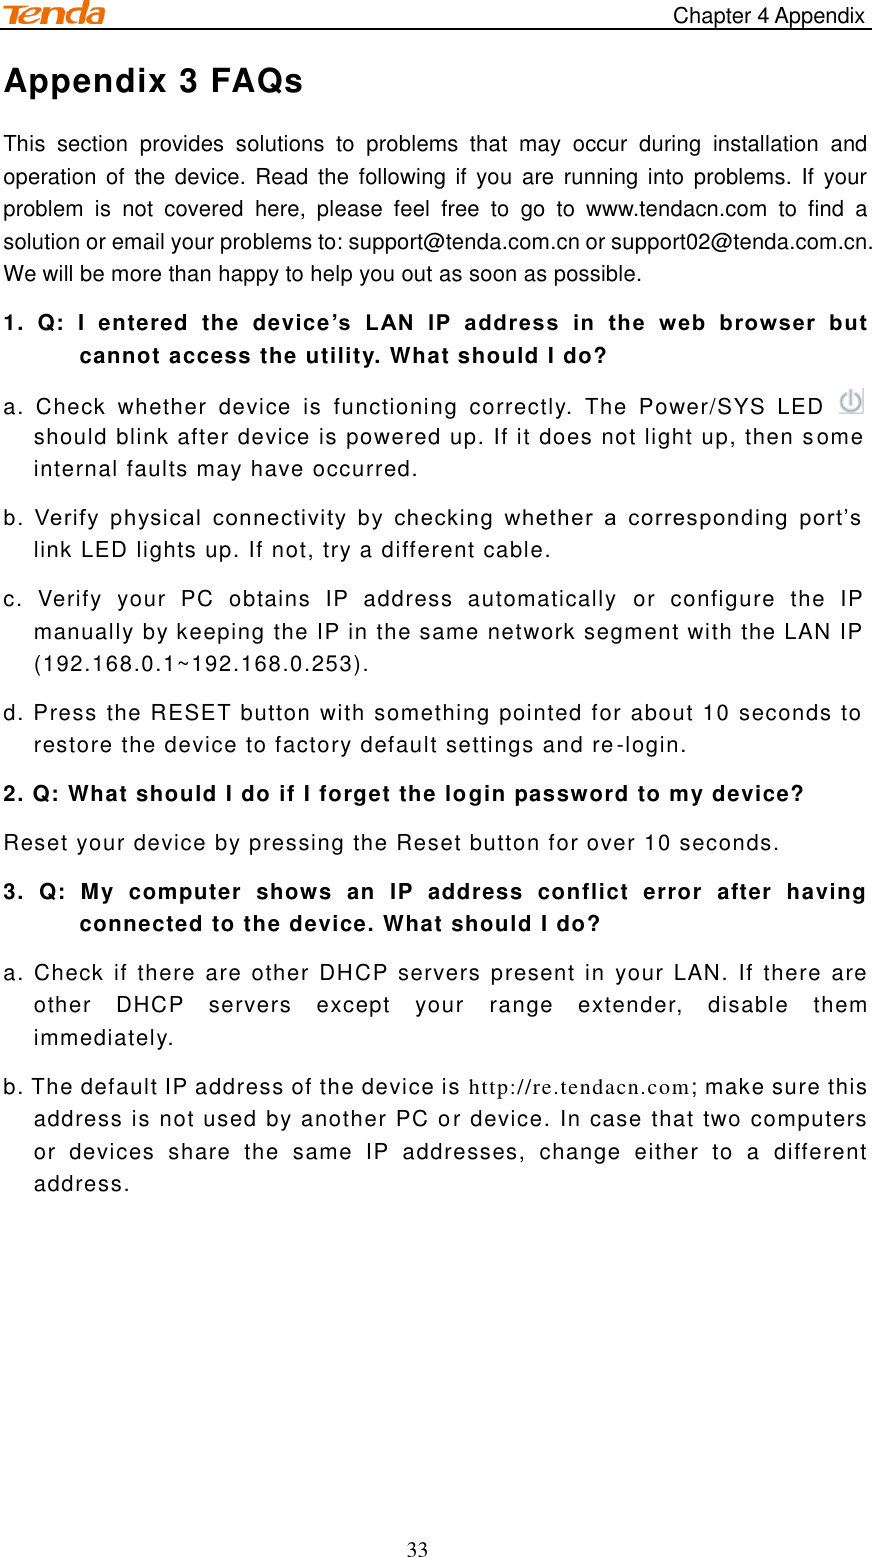                                                                                     Chapter 4 Appendix 33 Appendix 3 FAQs This  section  provides  solutions  to  problems  that  may  occur  during  installation  and operation of the device. Read the following if you are running into problems. If your problem  is  not  covered  here,  please  feel  free  to  go  to  www.tendacn.com  to  find  a solution or email your problems to: support@tenda.com.cn or support02@tenda.com.cn. We will be more than happy to help you out as soon as possible. 1.  Q:  I  entered  the  device’s  LAN  IP  address  in  the  web  browser  but cannot access the utility. What should I do? a.  Check  whether  device  is  functioning  correctly.  The  Power/SYS  LED    should blink after device is powered up. If it does not light up, then s ome internal faults may have occurred. b.  Verify  physical  connectivity  by  checking  whether  a  corresponding  port’s link LED lights up. If not, try a different cable.   c.  Verify  your  PC  obtains  IP  address  automatically  or  configure  the  IP manually by keeping the IP in the same network segment with the LAN IP (192.168.0.1~192.168.0.253). d. Press the RESET button with something pointed for about 10 seconds to restore the device to factory default settings and re-login. 2. Q: What should I do if I forget the login password to my device? Reset your device by pressing the Reset button for over 10 seconds.  3.  Q:  My  computer  shows  an  IP  address  conflict  error  after  having connected to the device. What should I do? a. Check if  there are other DHCP  servers present  in  your LAN. If there are other  DHCP  servers  except  your  range  extender,  disable  them immediately. b. The default IP address of the device is http://re.tendacn.com; make sure this address is not used by another PC or device. In case that two computers or  devices  share  the  same  IP  addresses,  change  either  to  a  different address.    